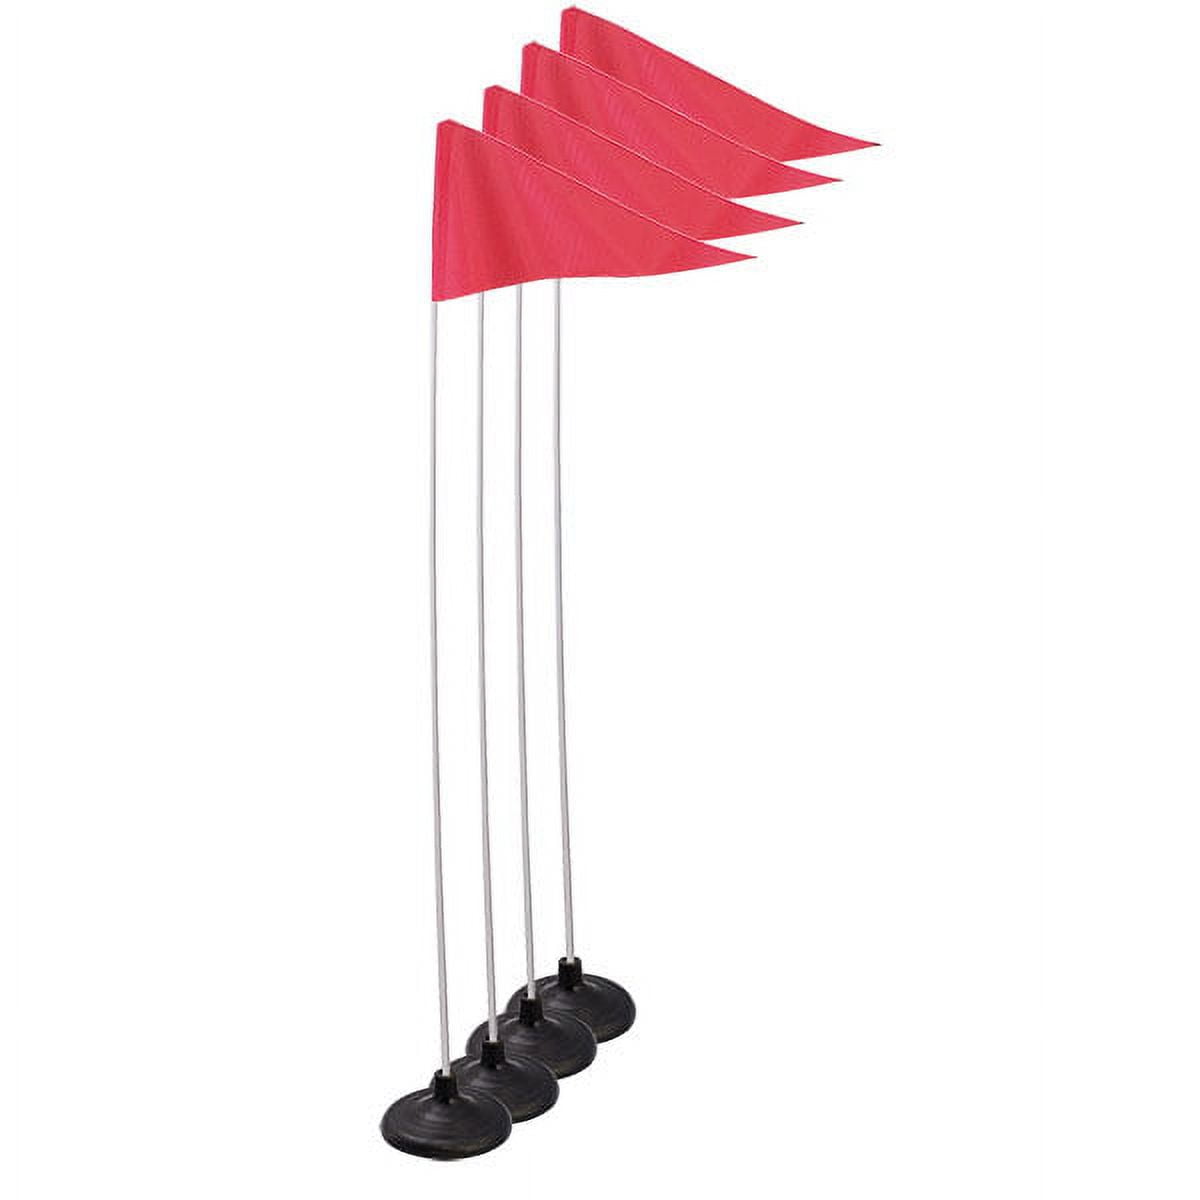 Picture of Champion Sports SCF60 Premium Corner Flags, Red - Set of 4